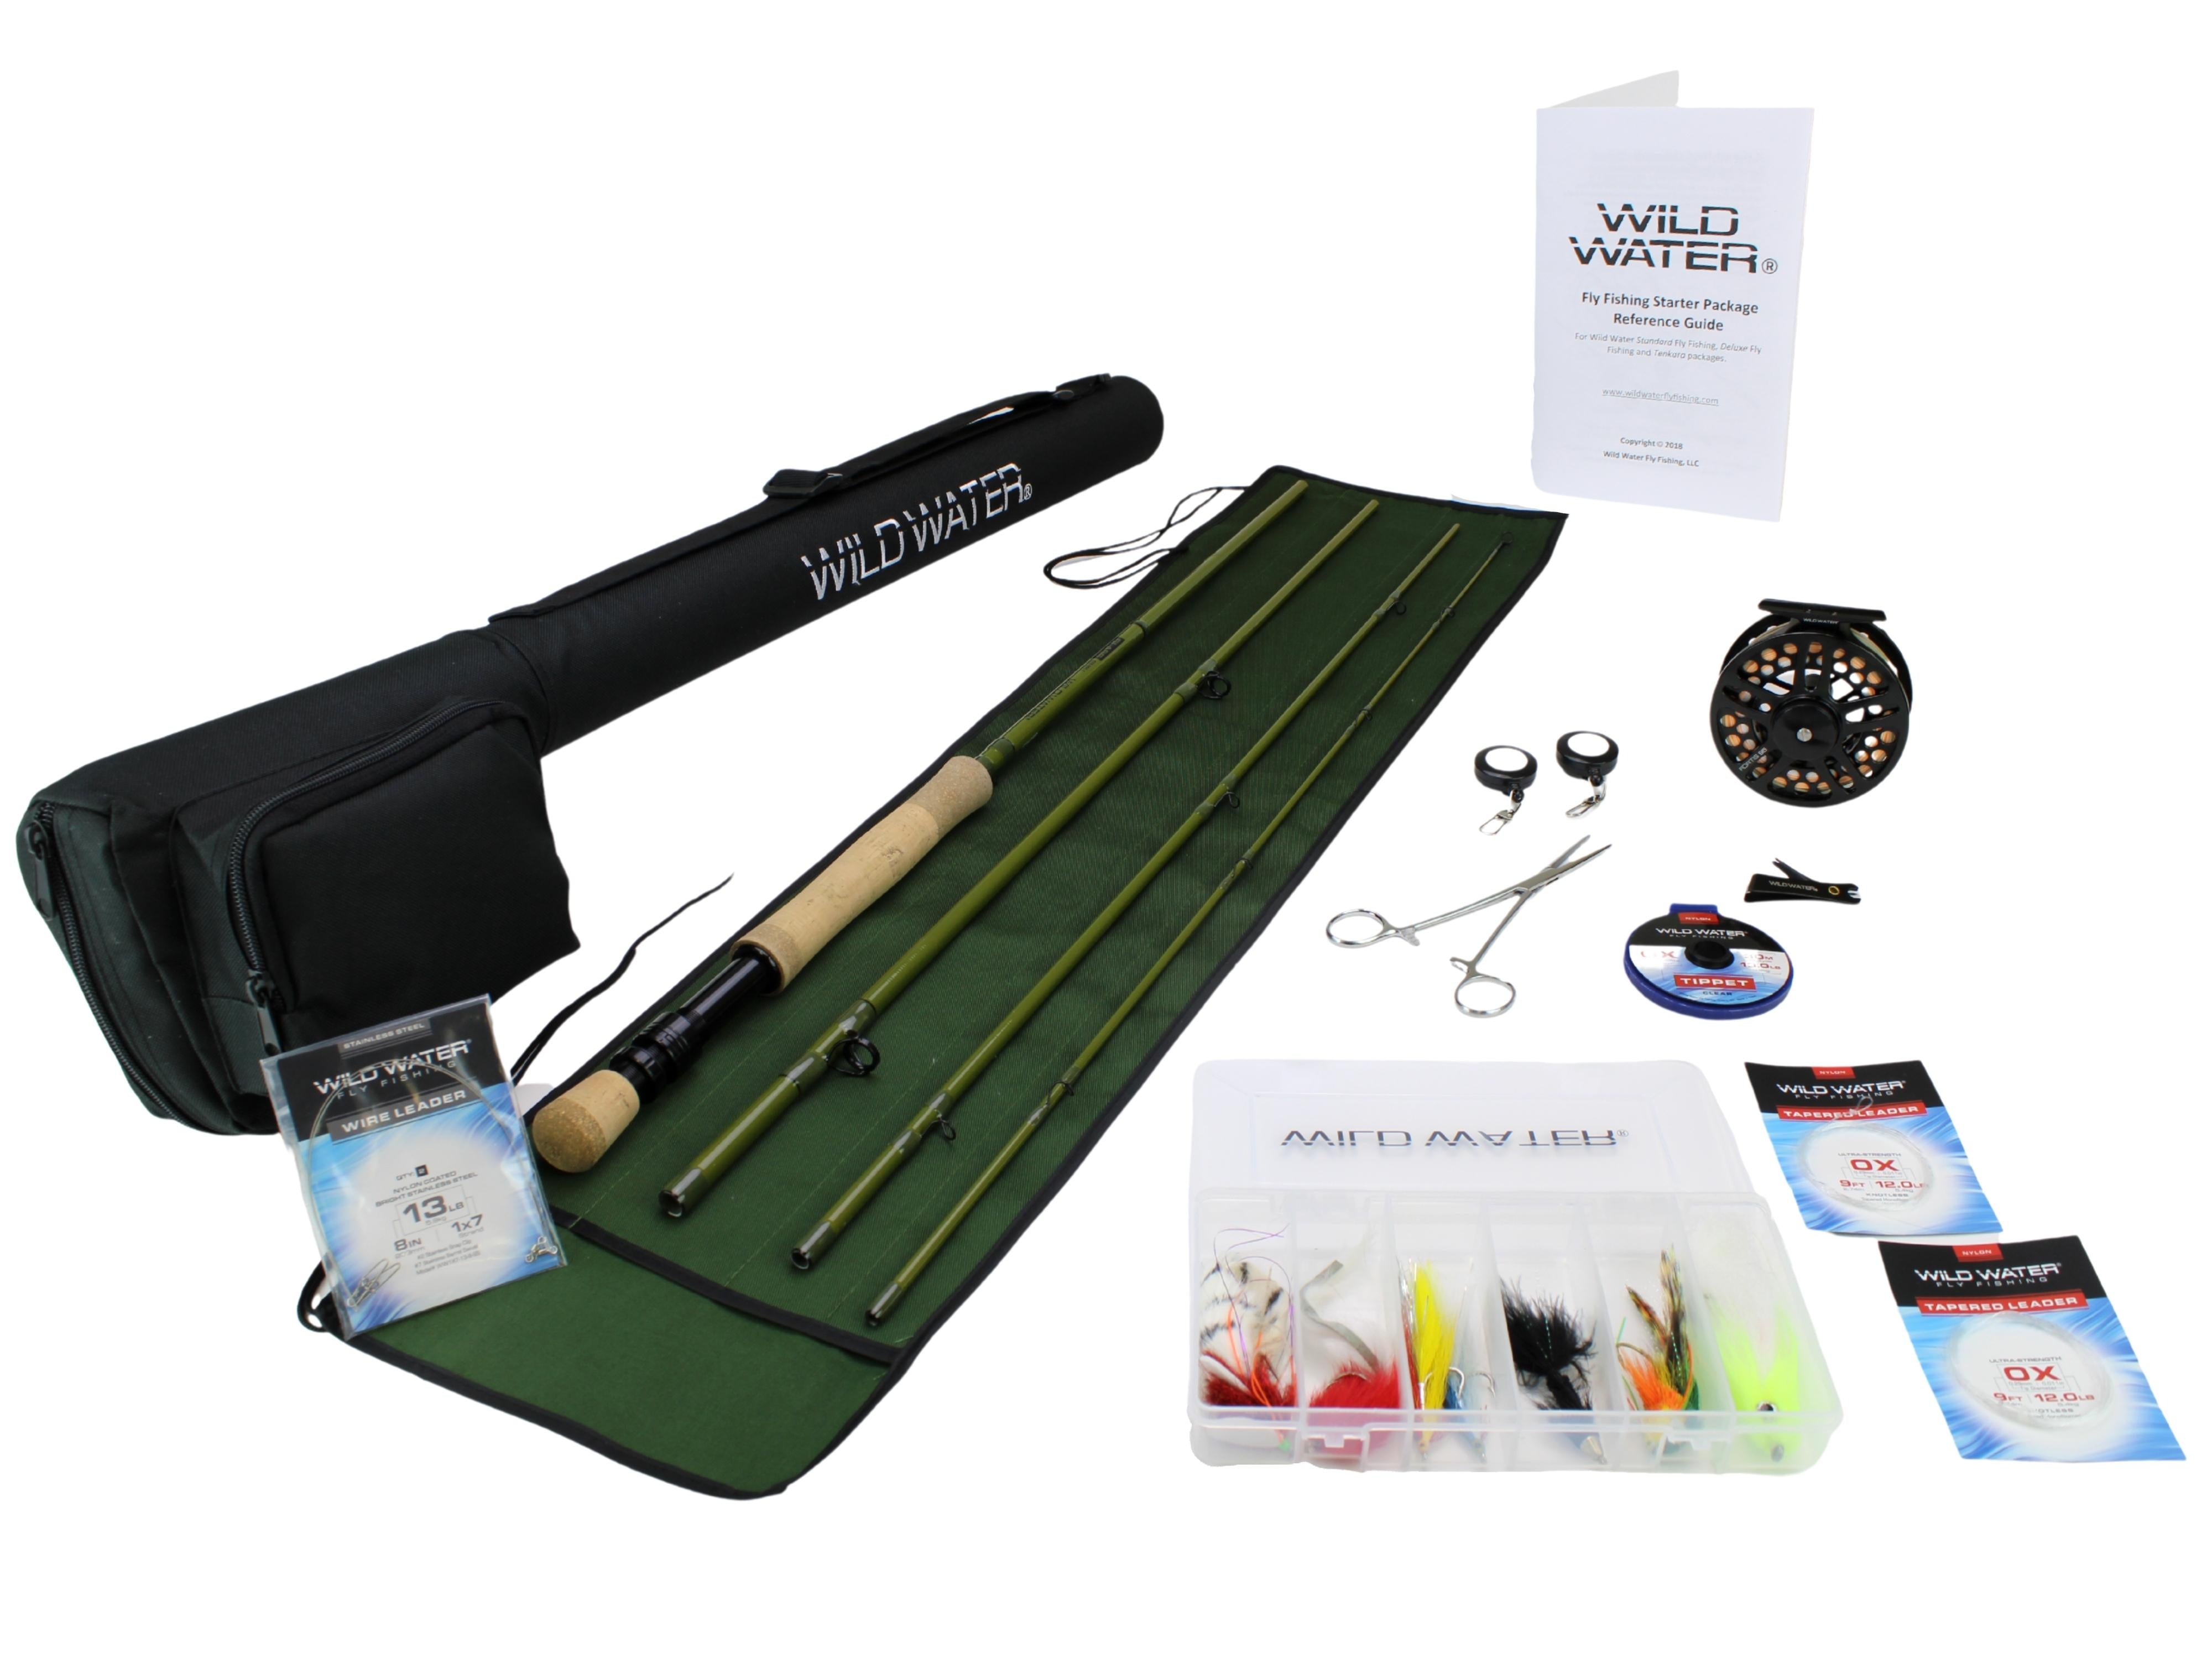 Wild Water Fly Fishing Case for Rod, Reel & Accessories (7 foot, 4